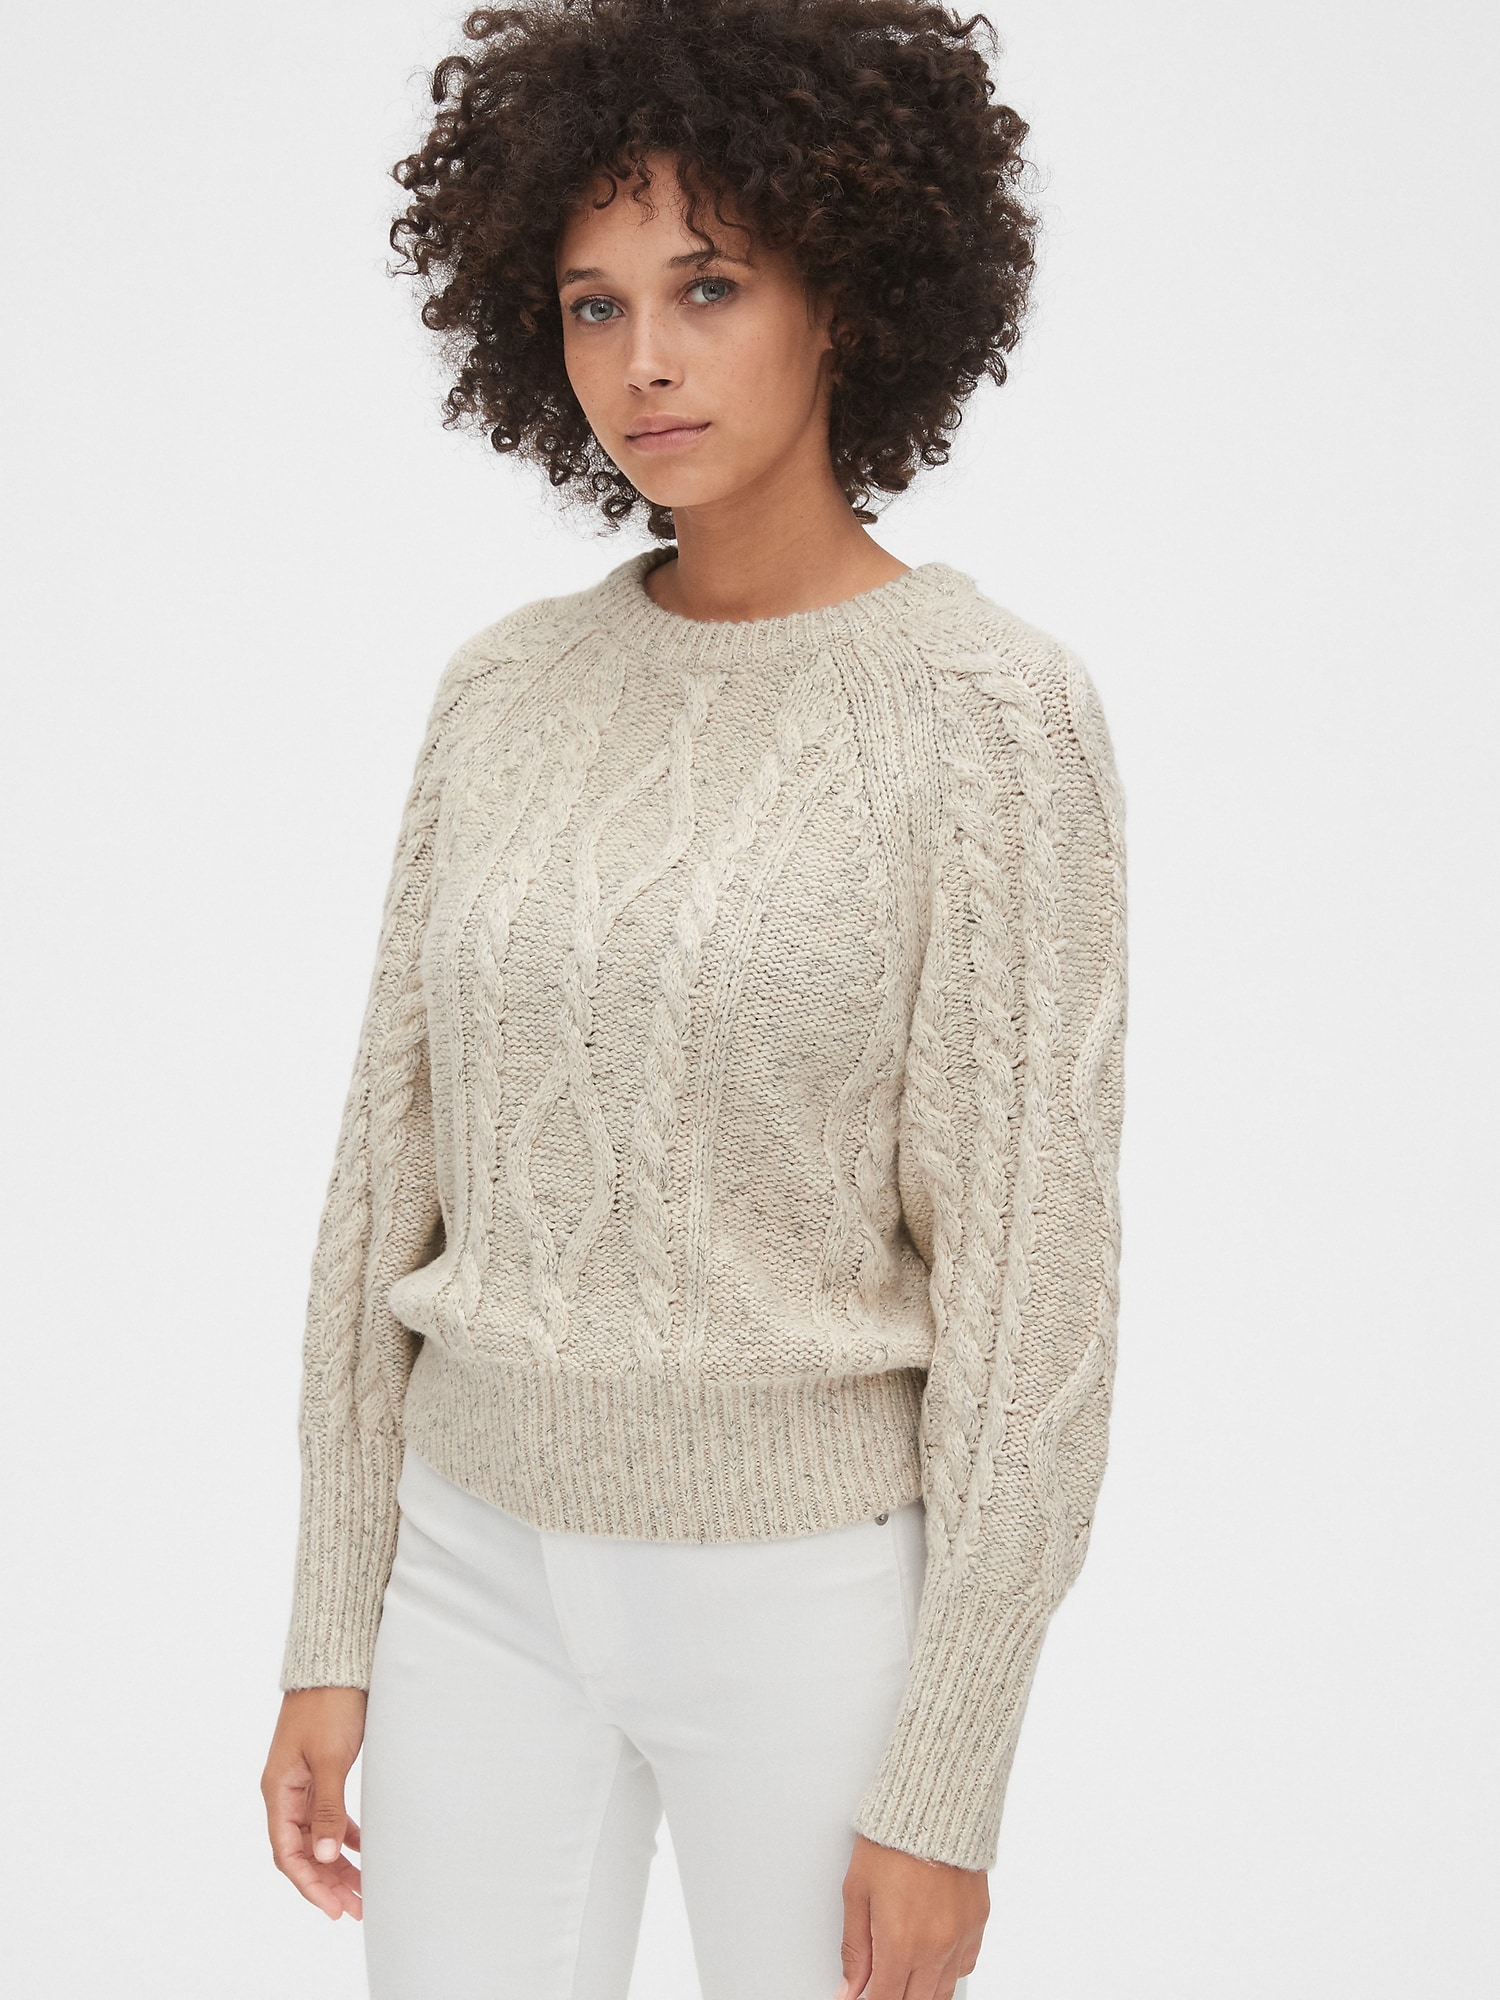 Marled Cable-Knit Crewneck Sweater | Gap